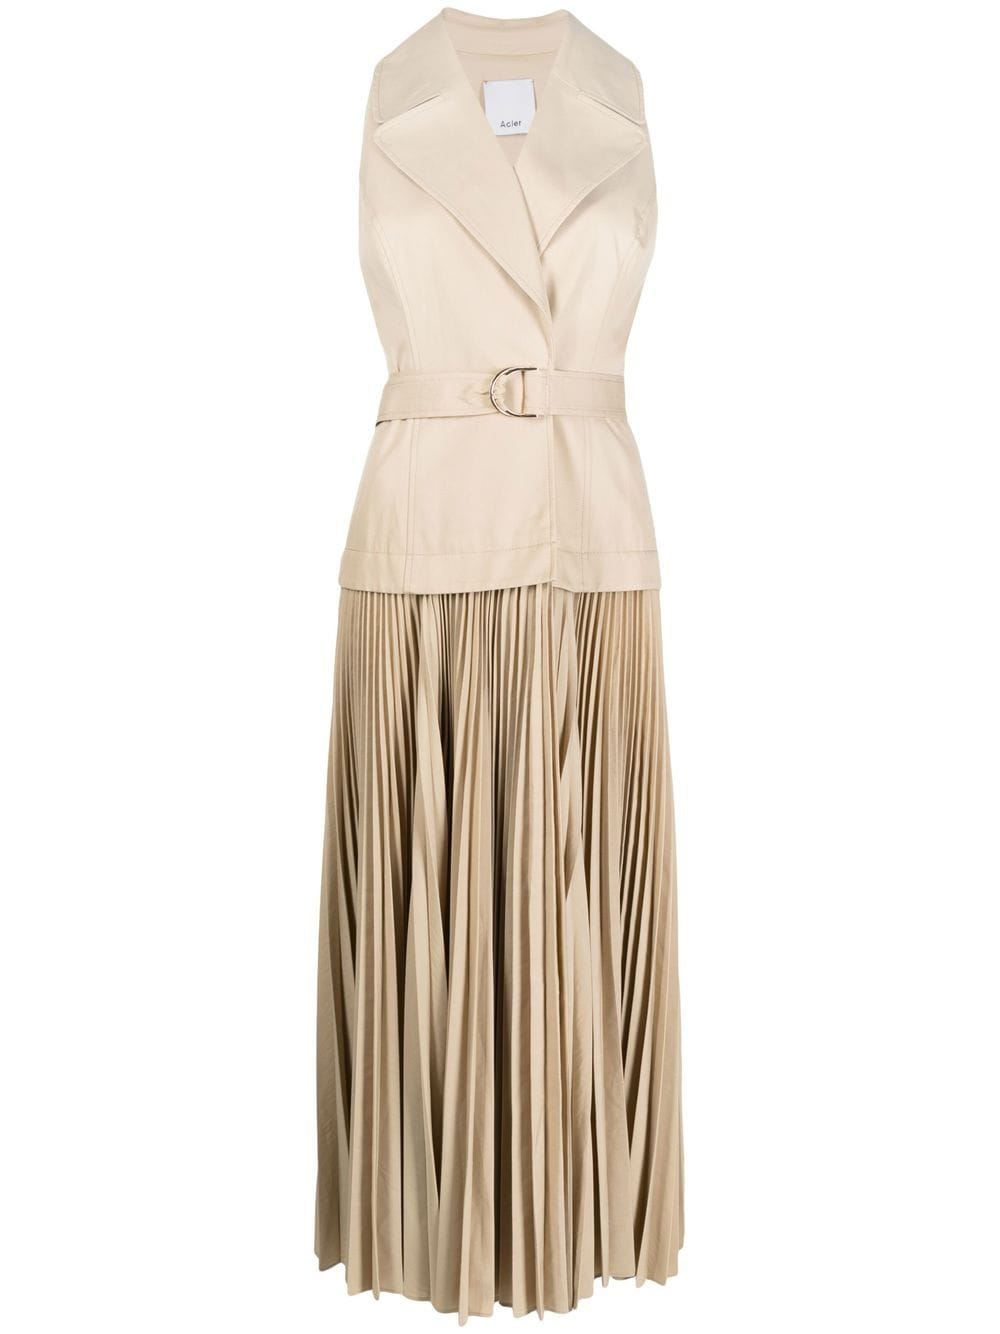 Acler Layered Pleated Dress - Farfetch